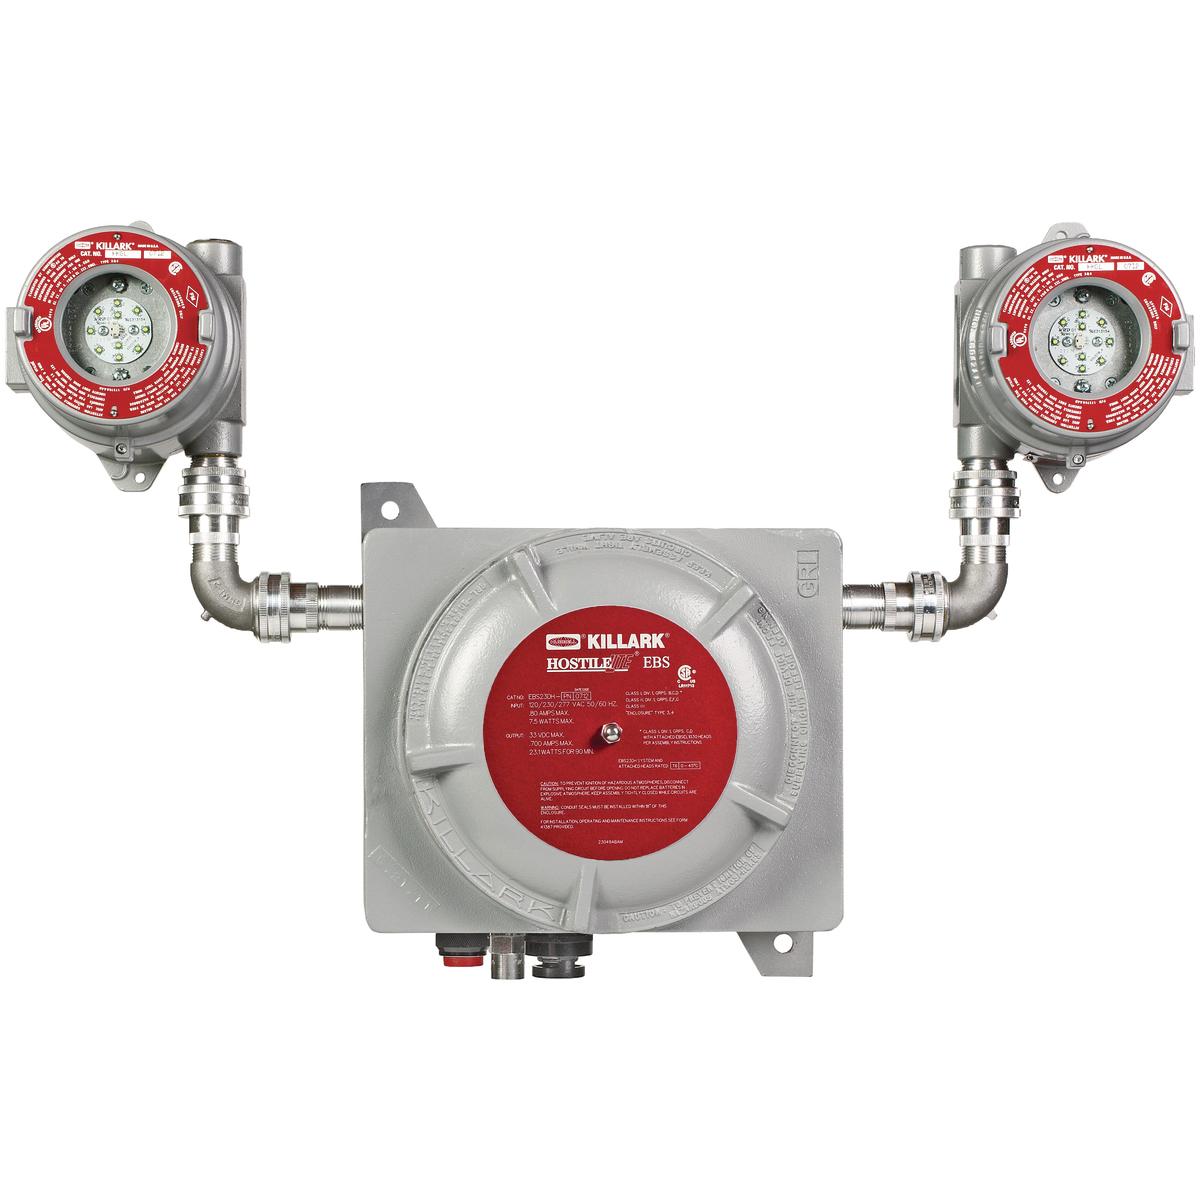 Hubbell EBS23DH-PNA The EBS Series Explosion Proof LED Emergency Battery Backup System is designed for egress or anti-panic applications. This fixture is made with a cast copper-free aluminum housing and fixture heads that are powder epoxy powder coat painted for extra corro